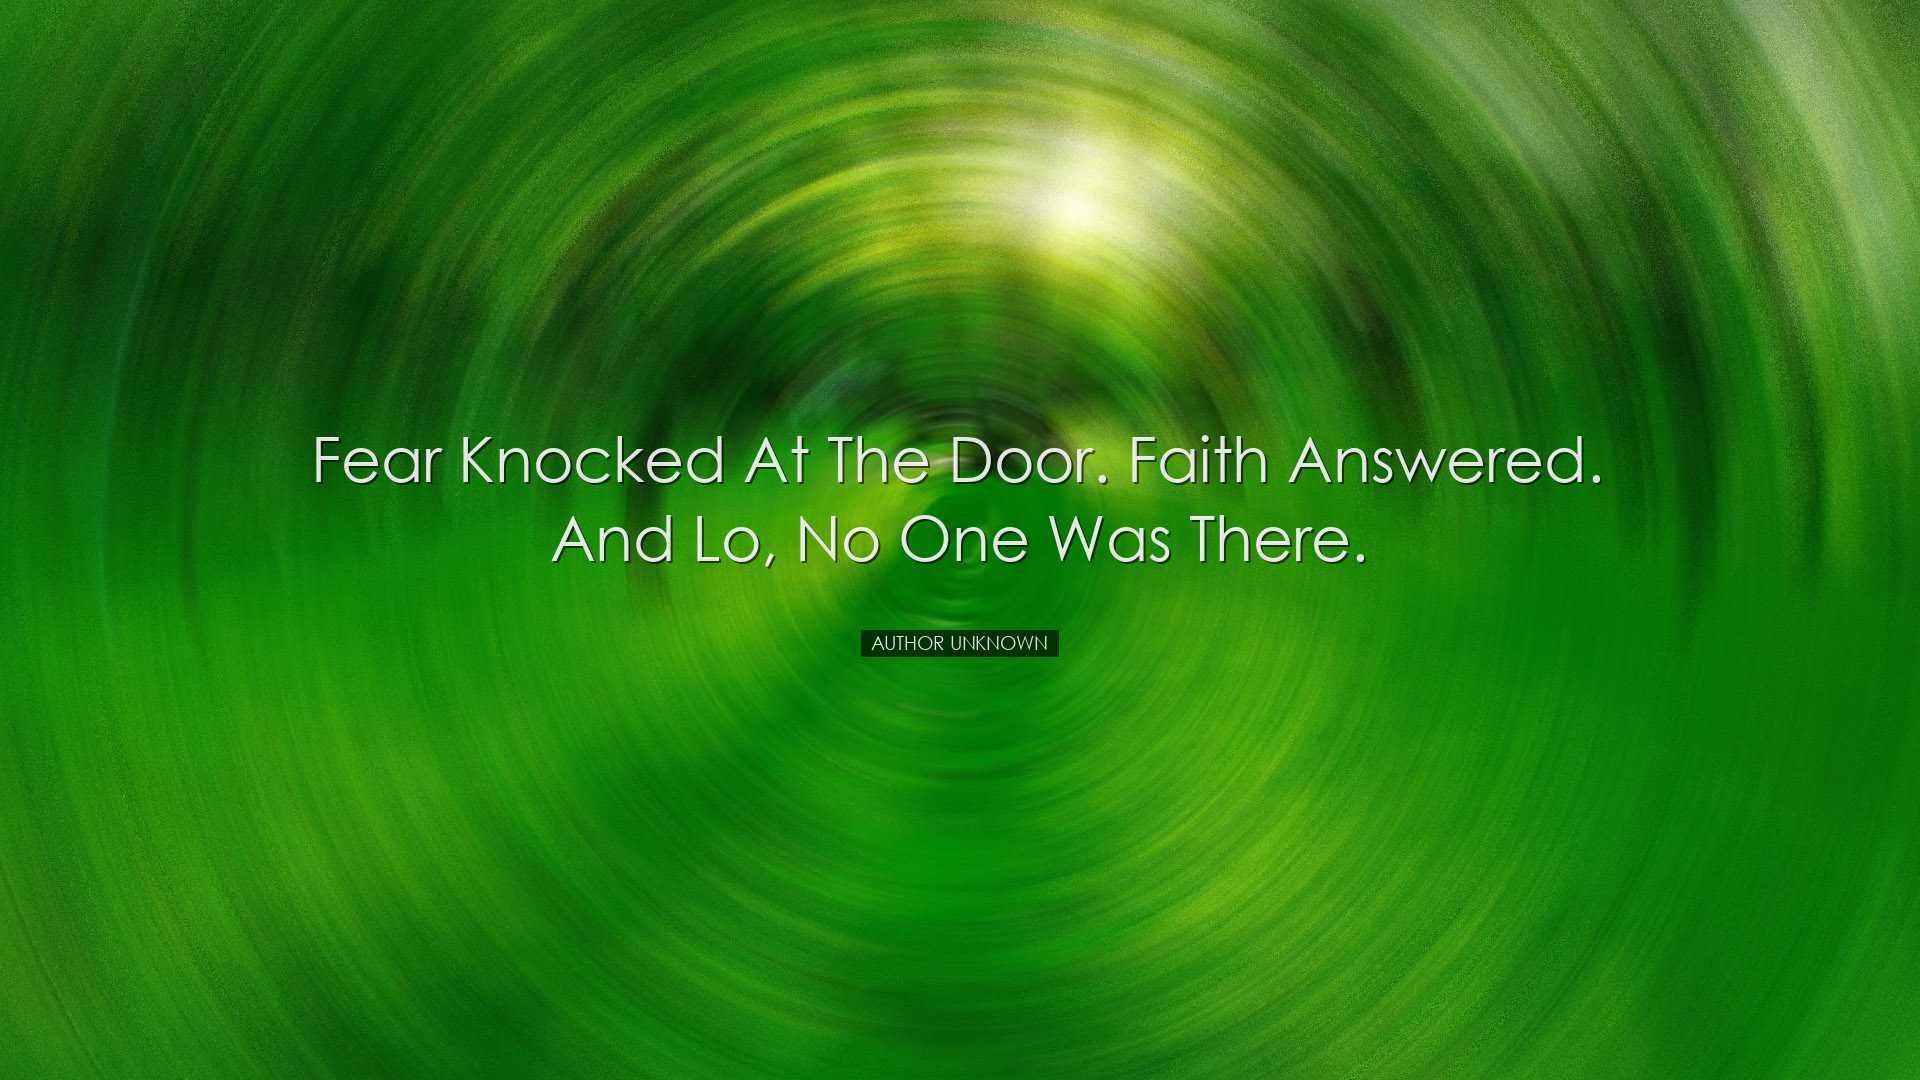 Fear knocked at the door. Faith answered. And lo, no one was there